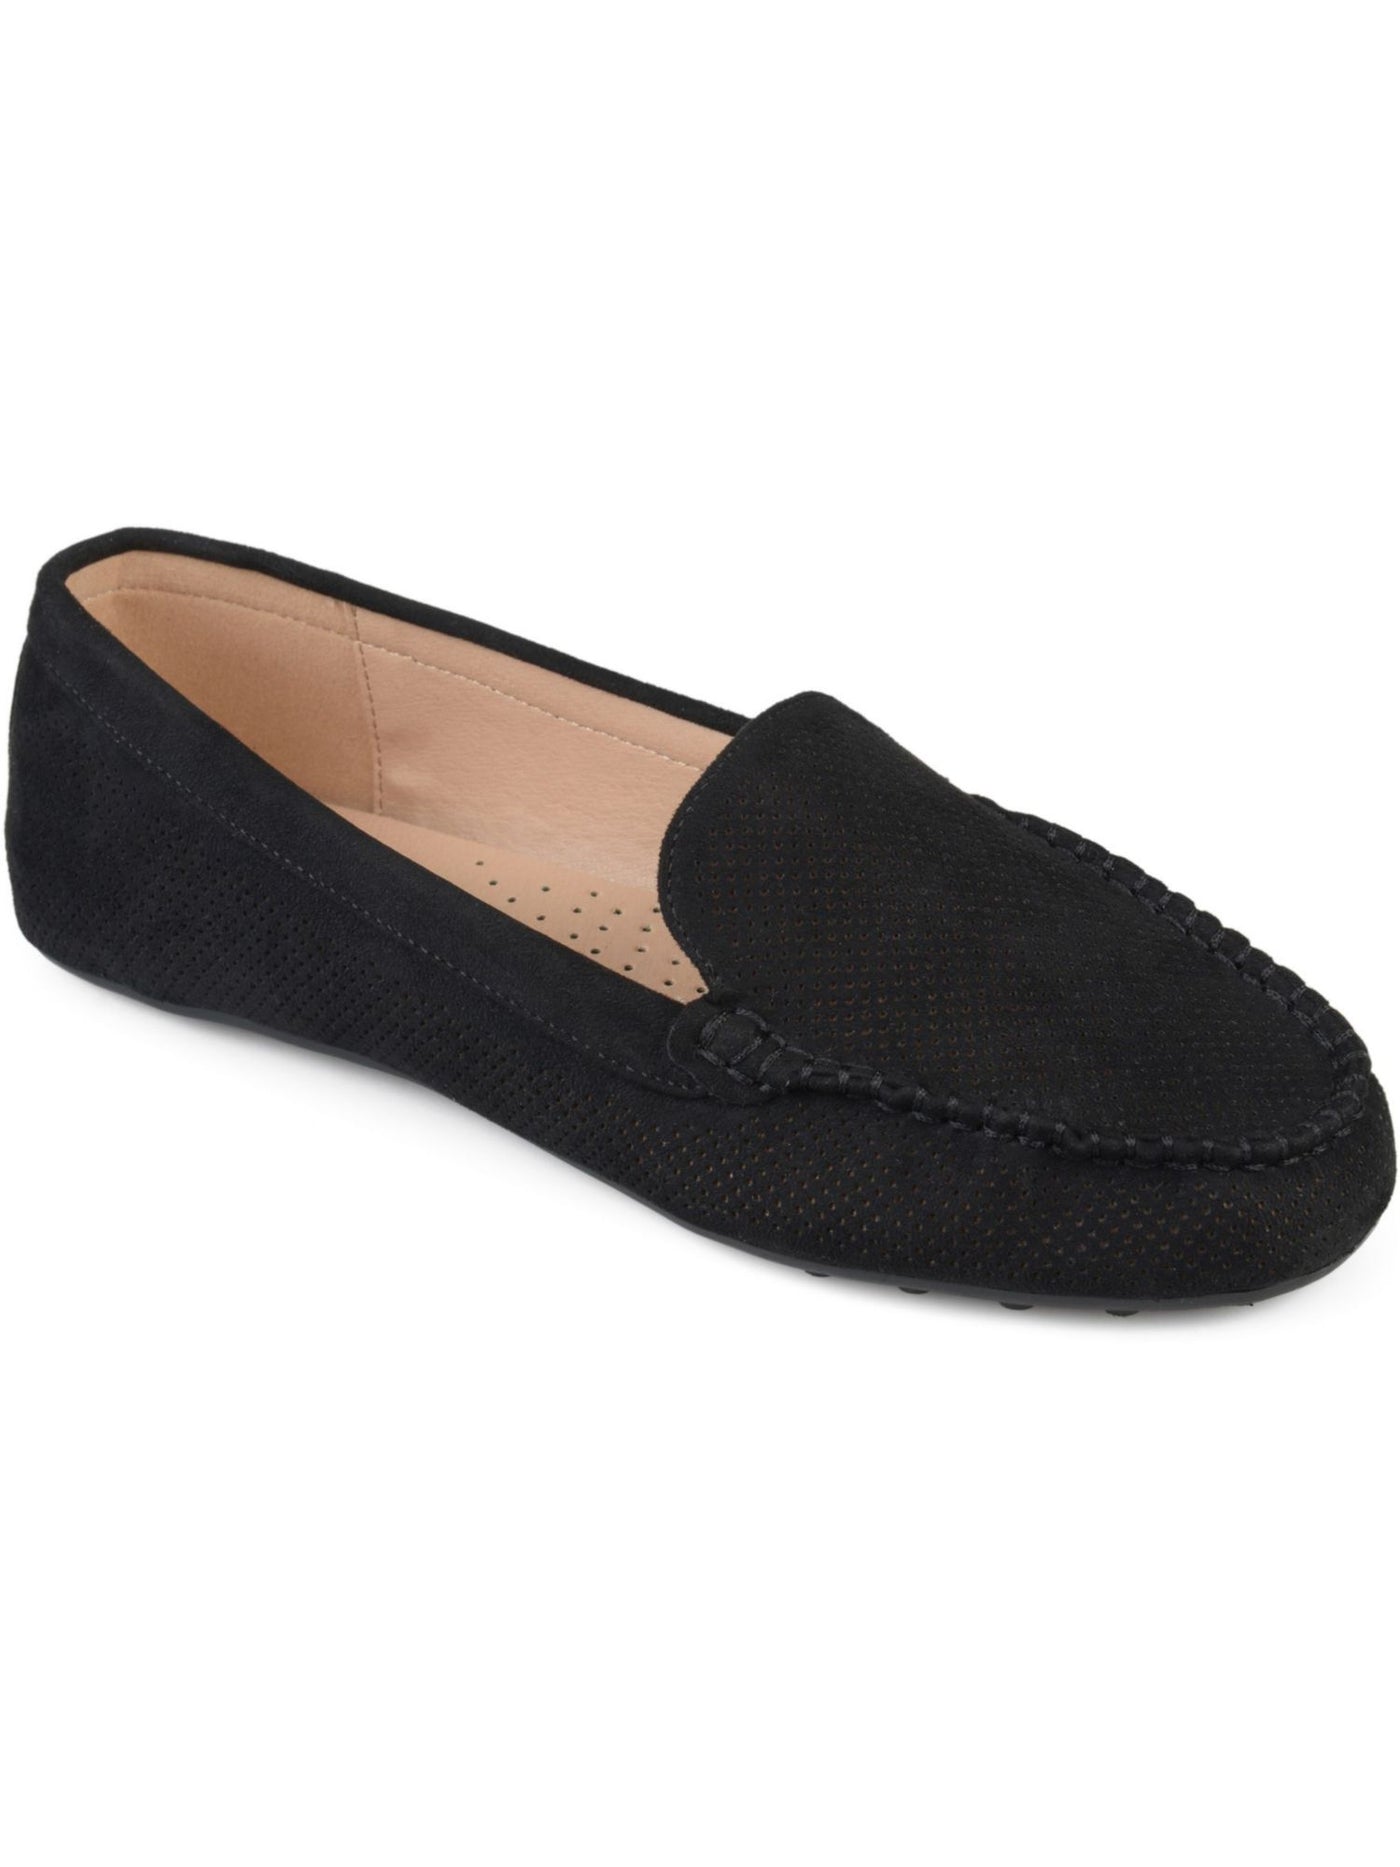 JOURNEE COLLECTION Womens Black Perforated Comfort Halsey Round Toe Slip On Loafers Shoes 11 W